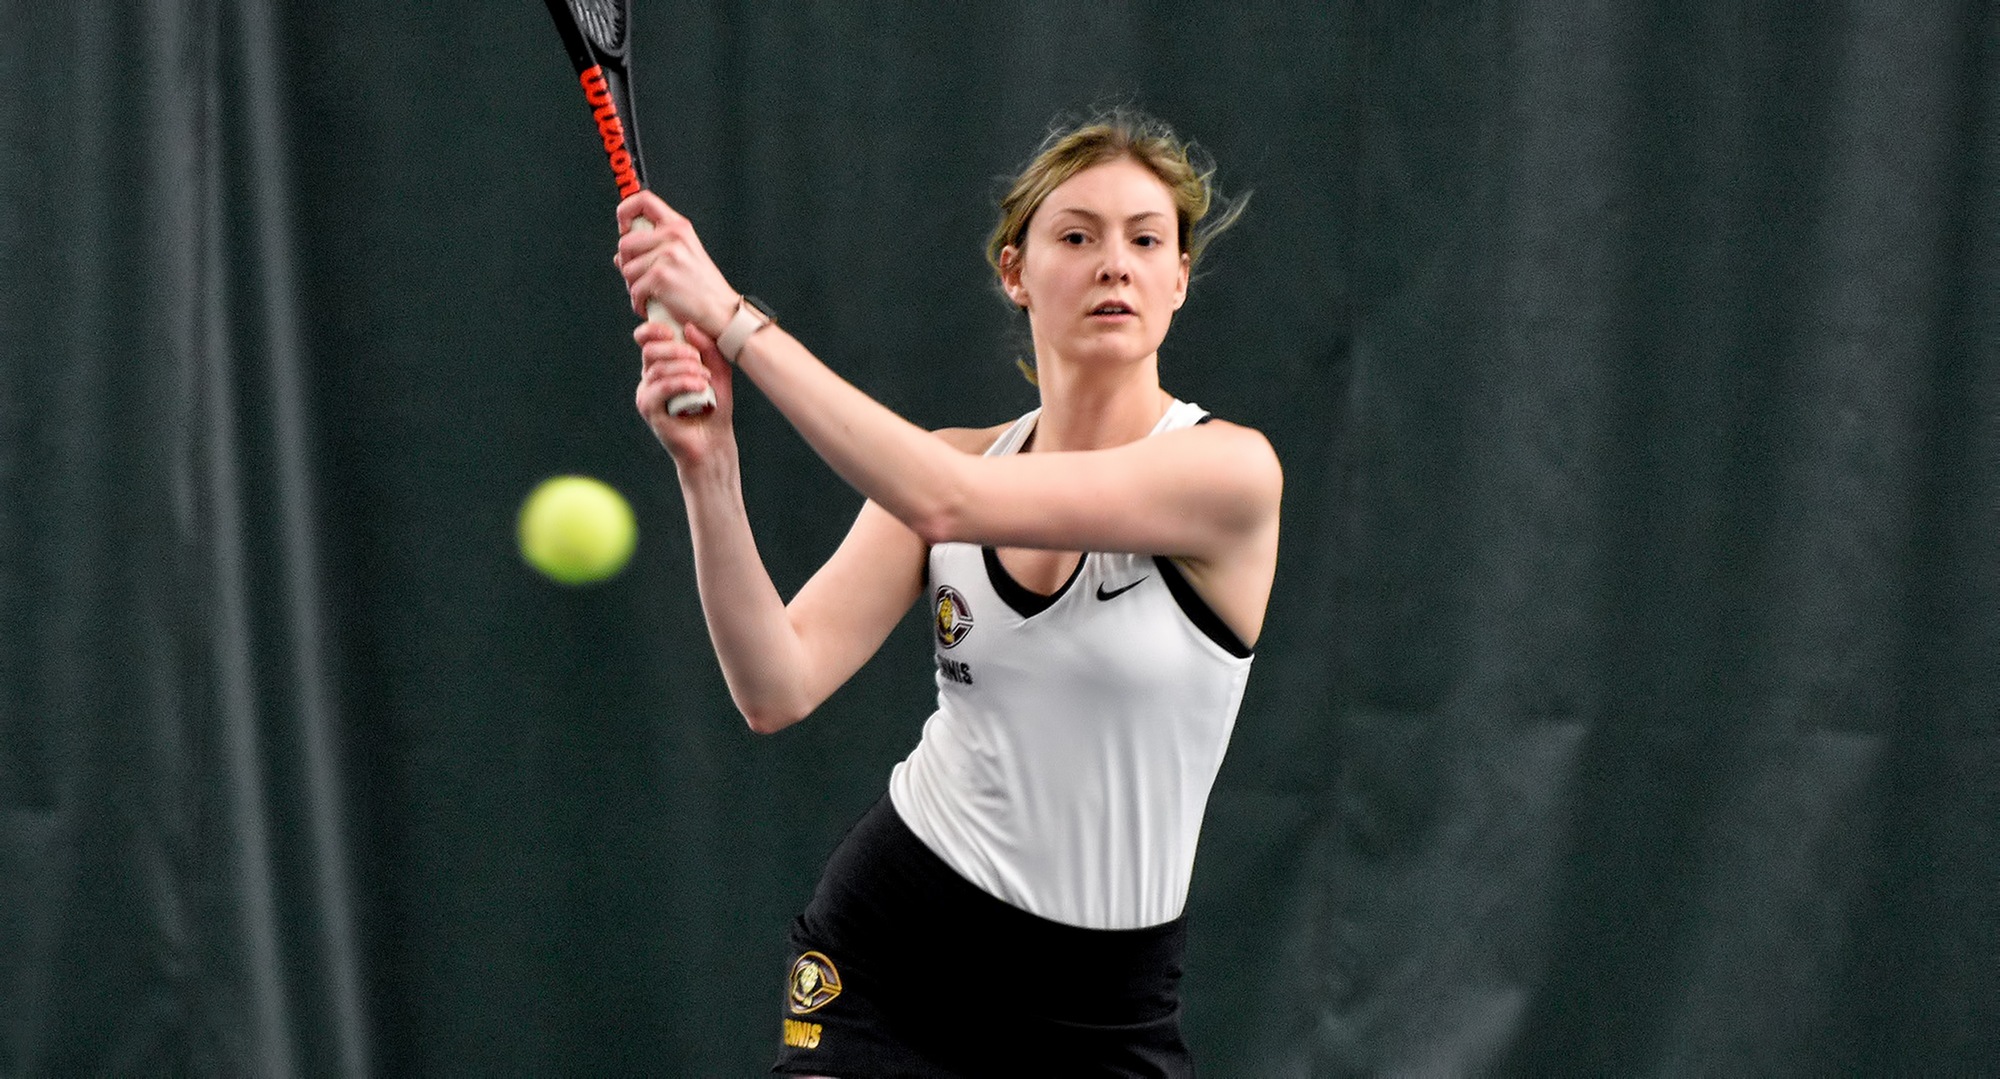 Junior Jenna Forknell eyes her backhand return during her match at No.2 singles in the Cobbers' home opener against St. Catherine.